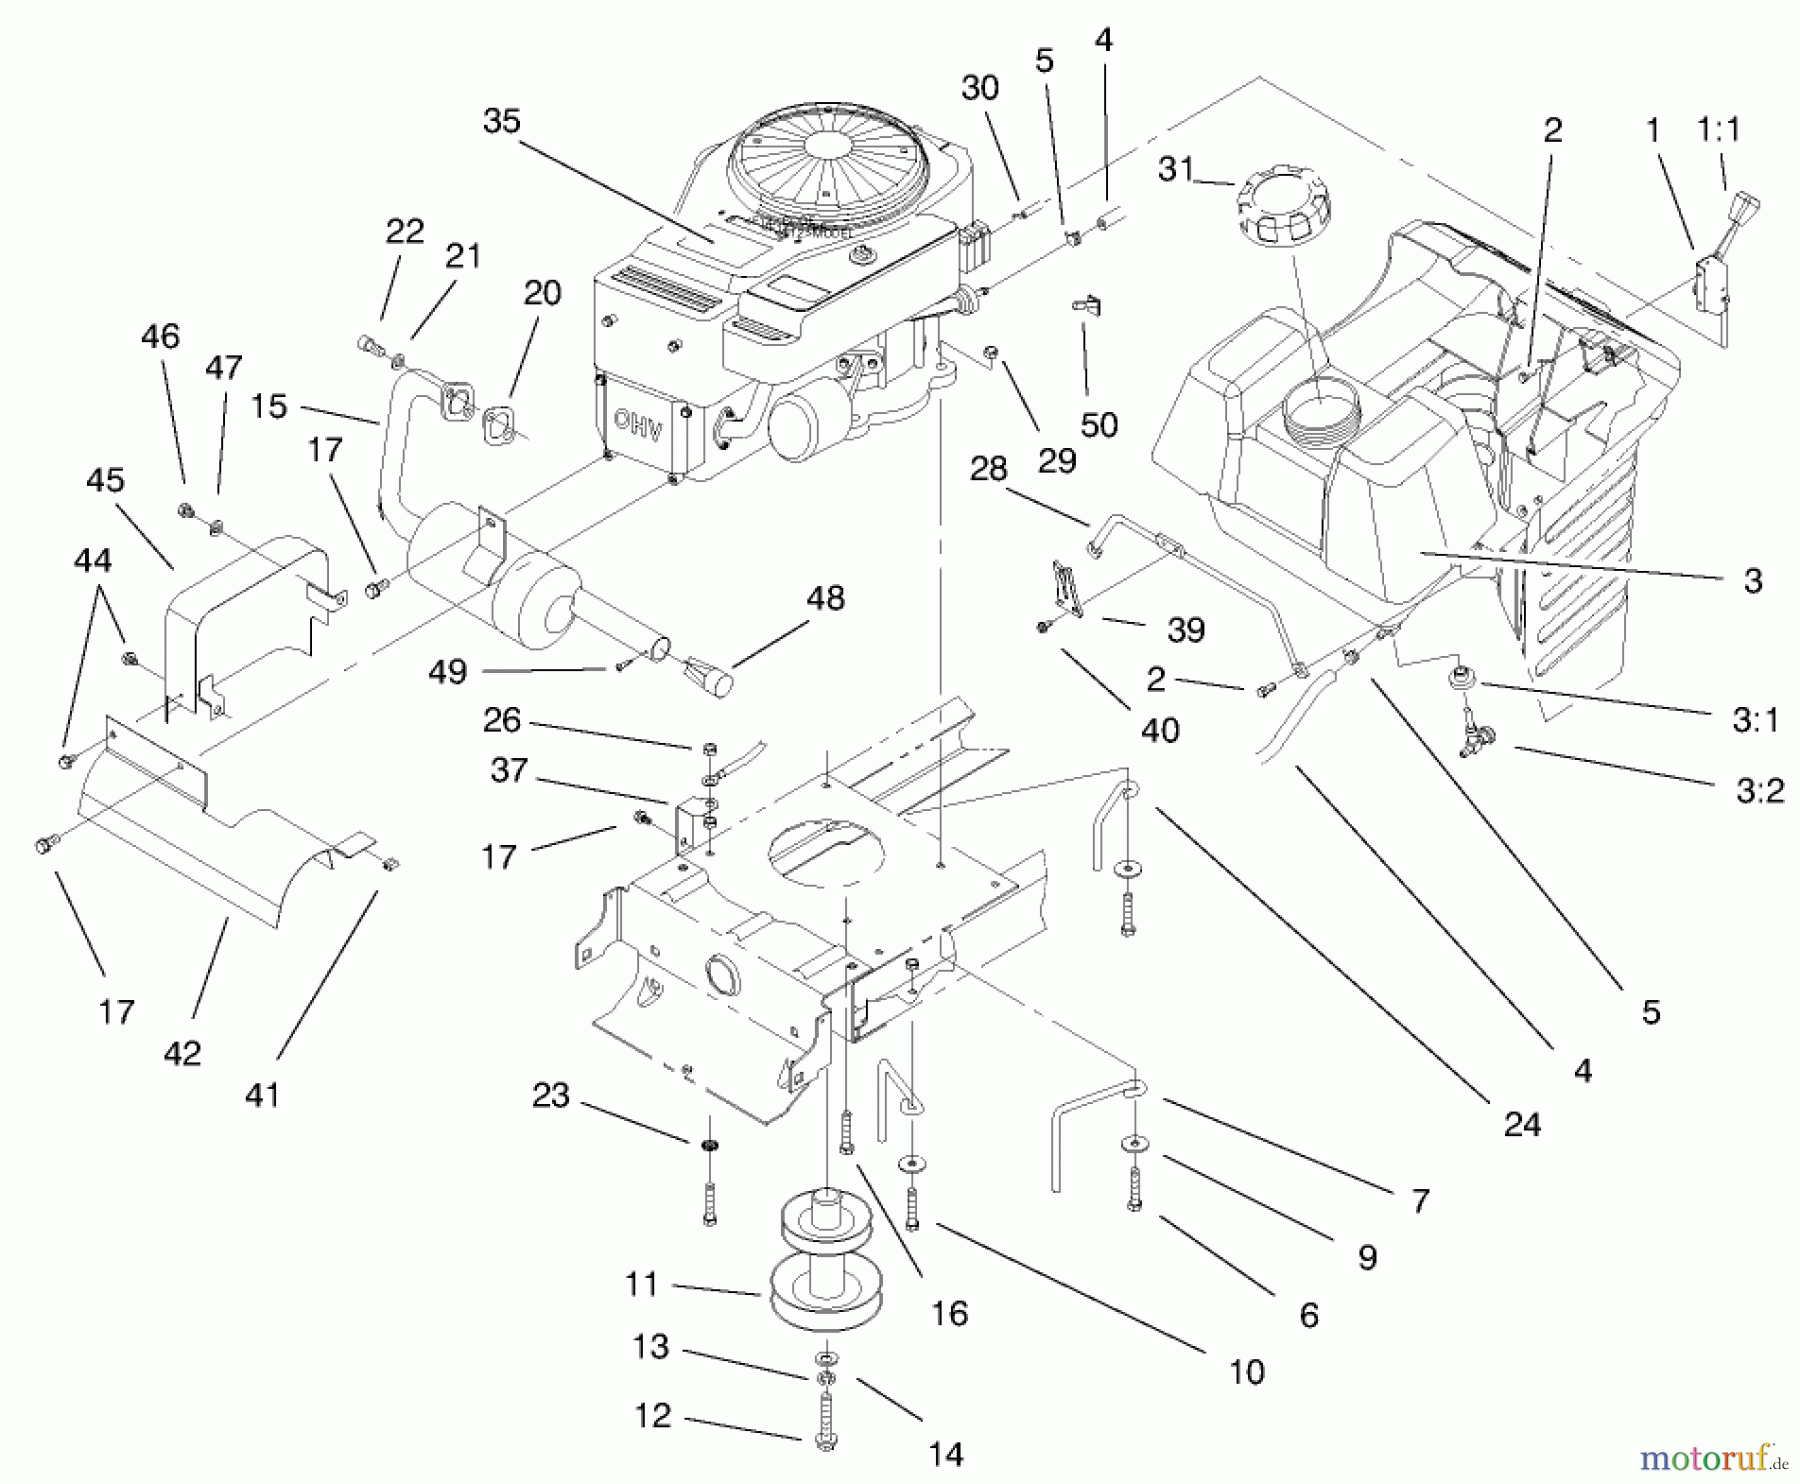  Toro Neu Mowers, Lawn & Garden Tractor Seite 1 71197 (17-44HXL) - Toro 17-44HXL Lawn Tractor, 2000 (200000001-200999999) ENGINE SYSTEMS COMPONENTS ASSEMBLY